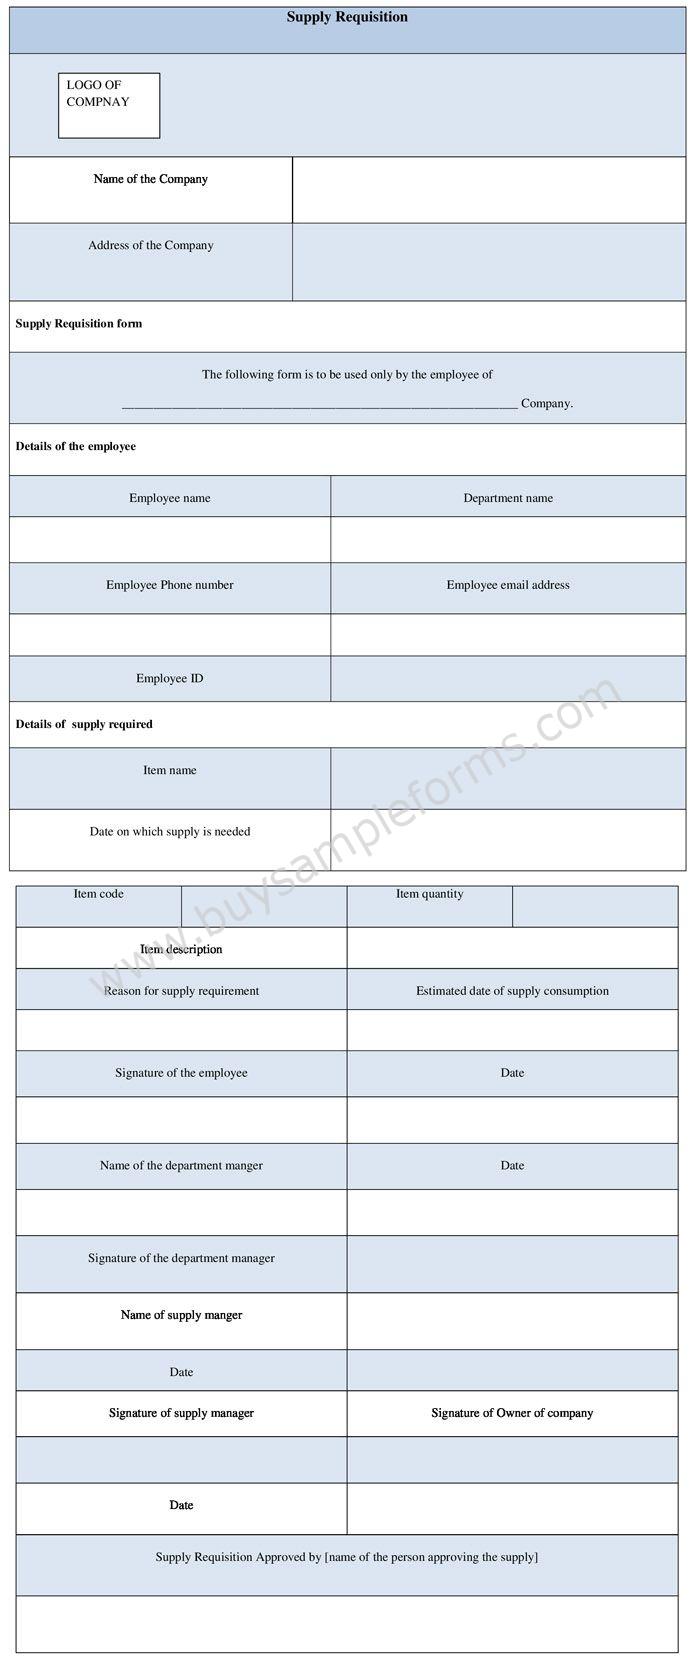 Supply Requisition Form Template Word DOC - office supply request form